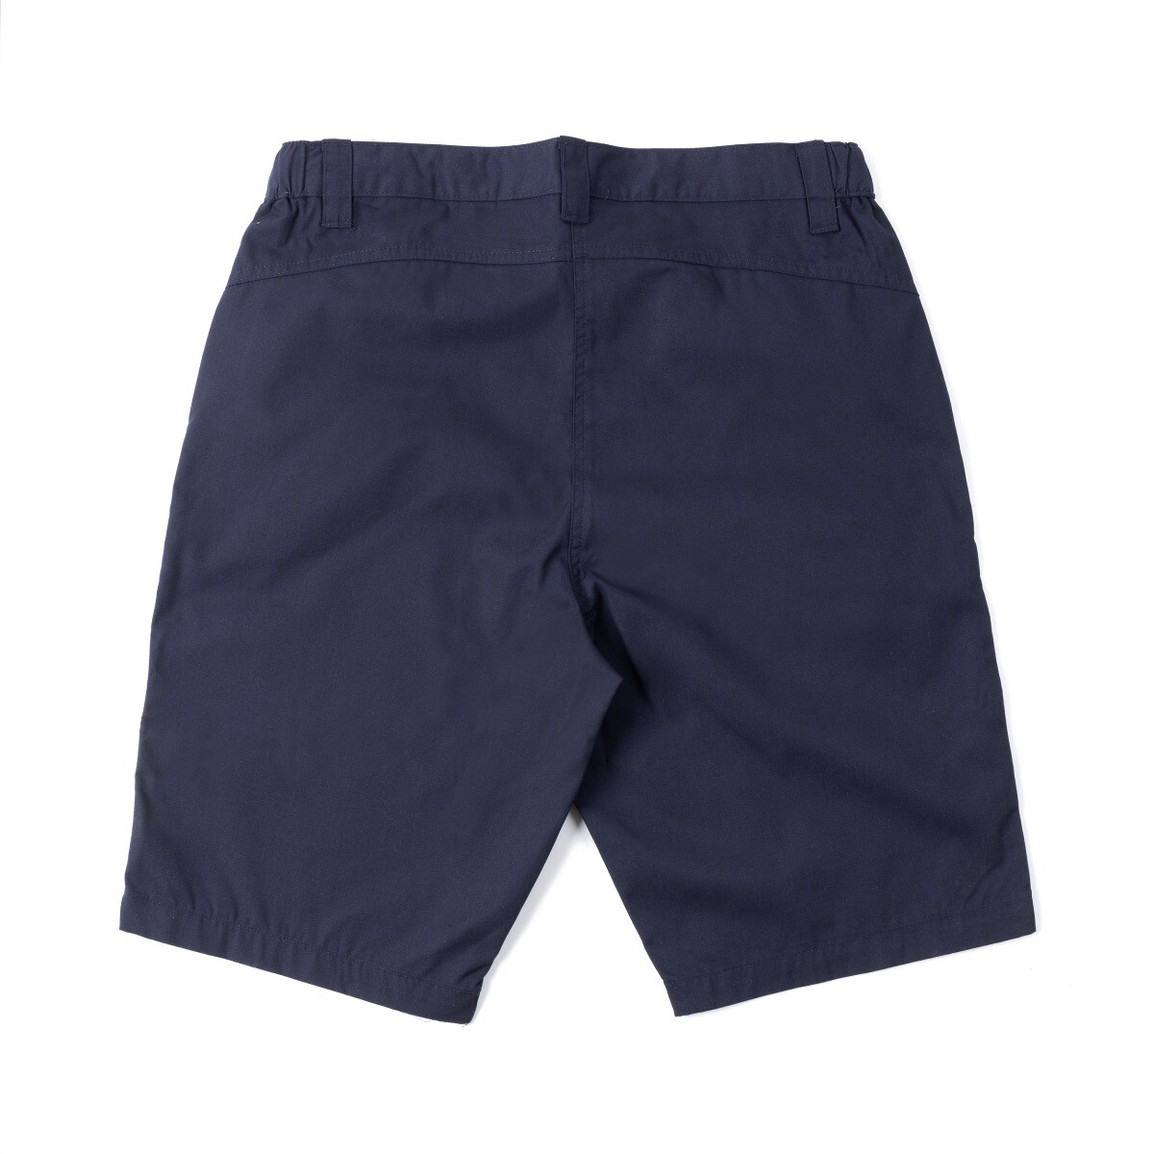 Womens Activity Shorts New in